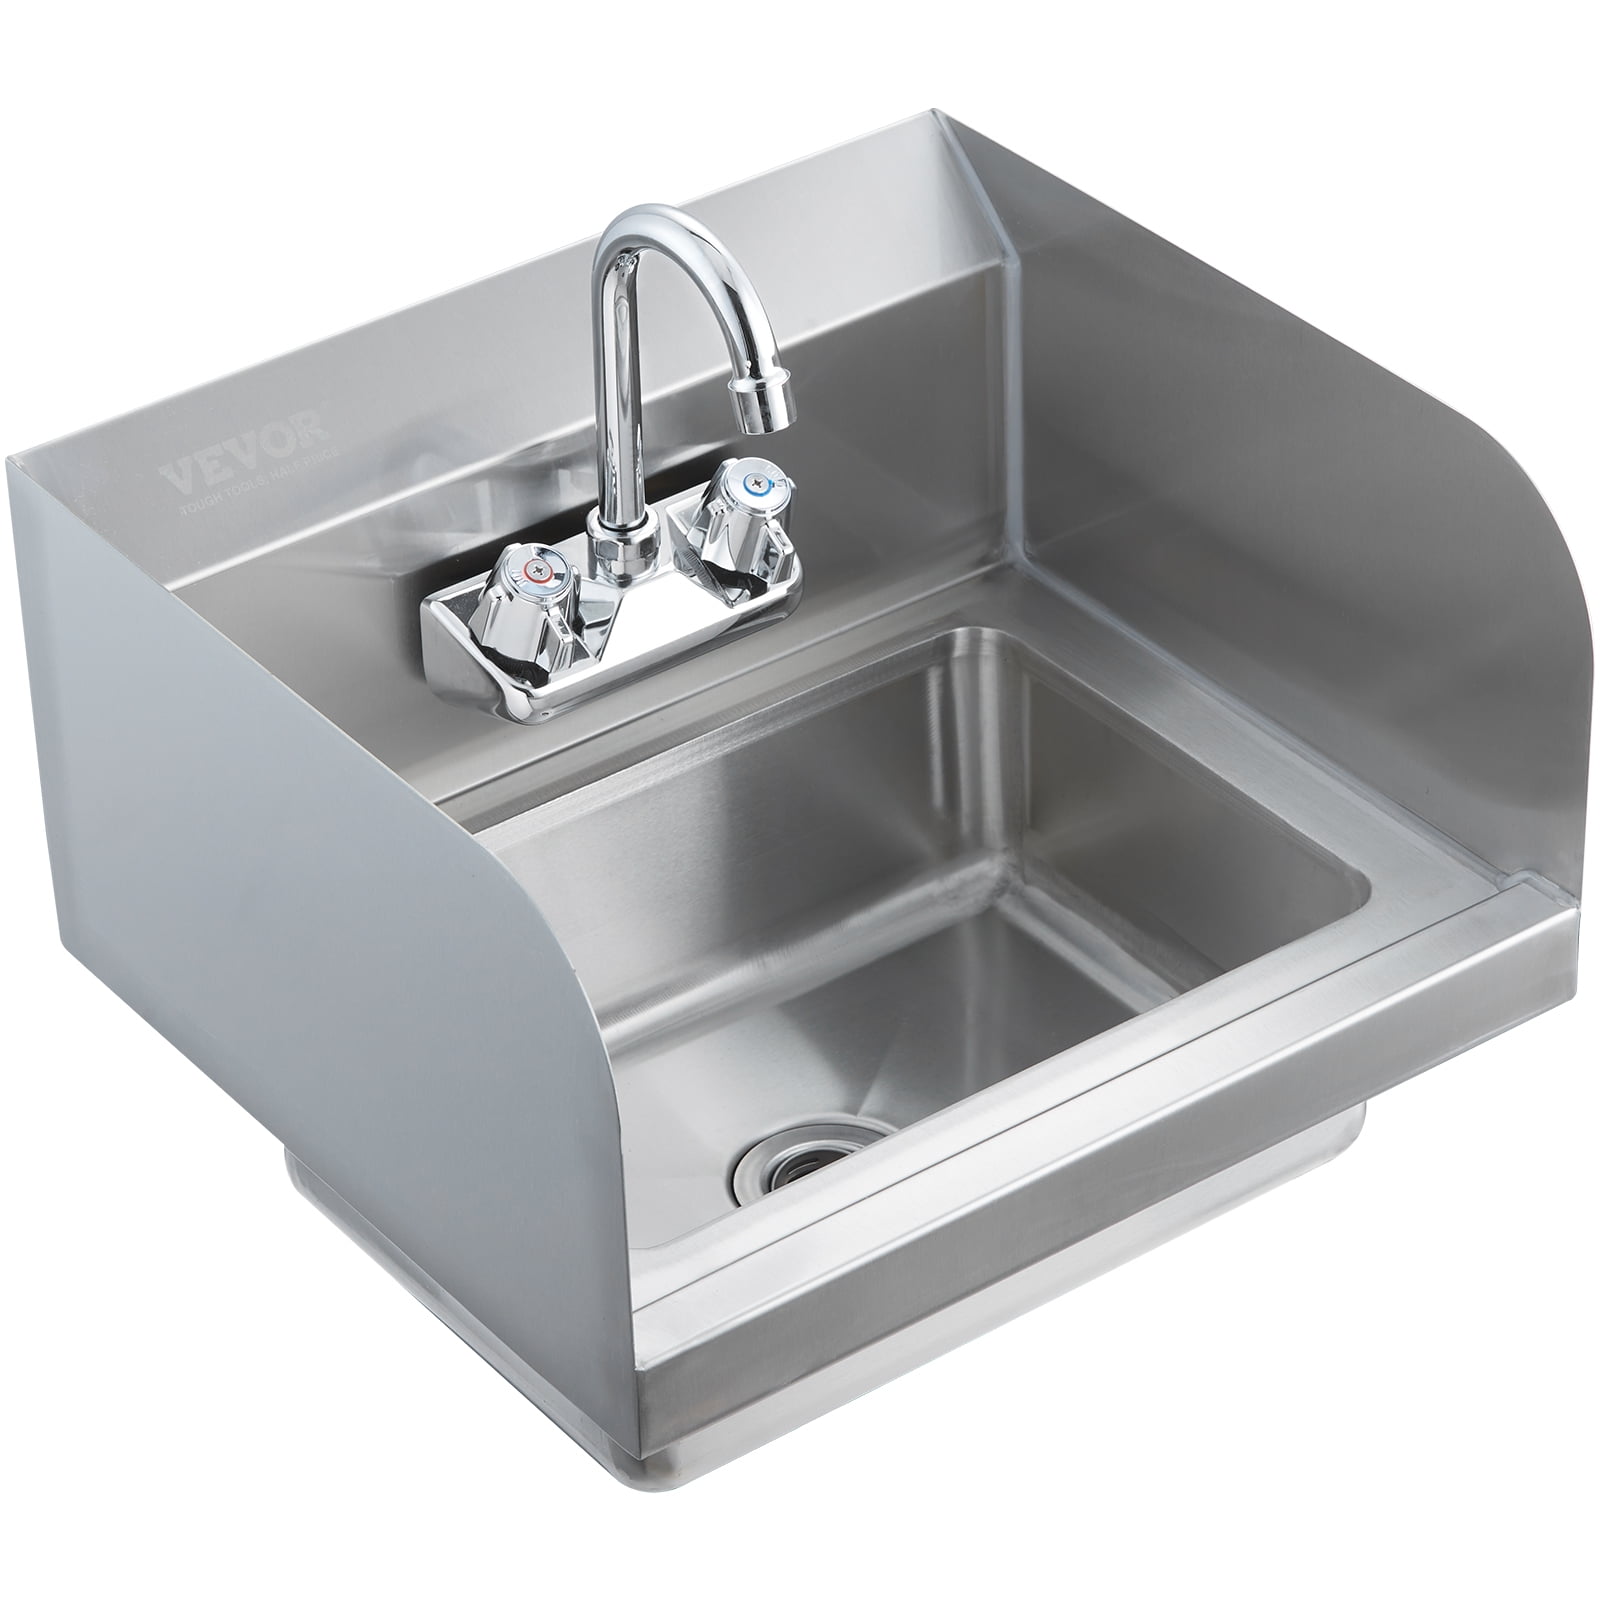 VEVOR Stainless Steel Utility Sink 39.4 x 19.1 x 37.4 in. Free Standing Single Bowl Commercial Kitchen Sink, NSF Certified, Silver